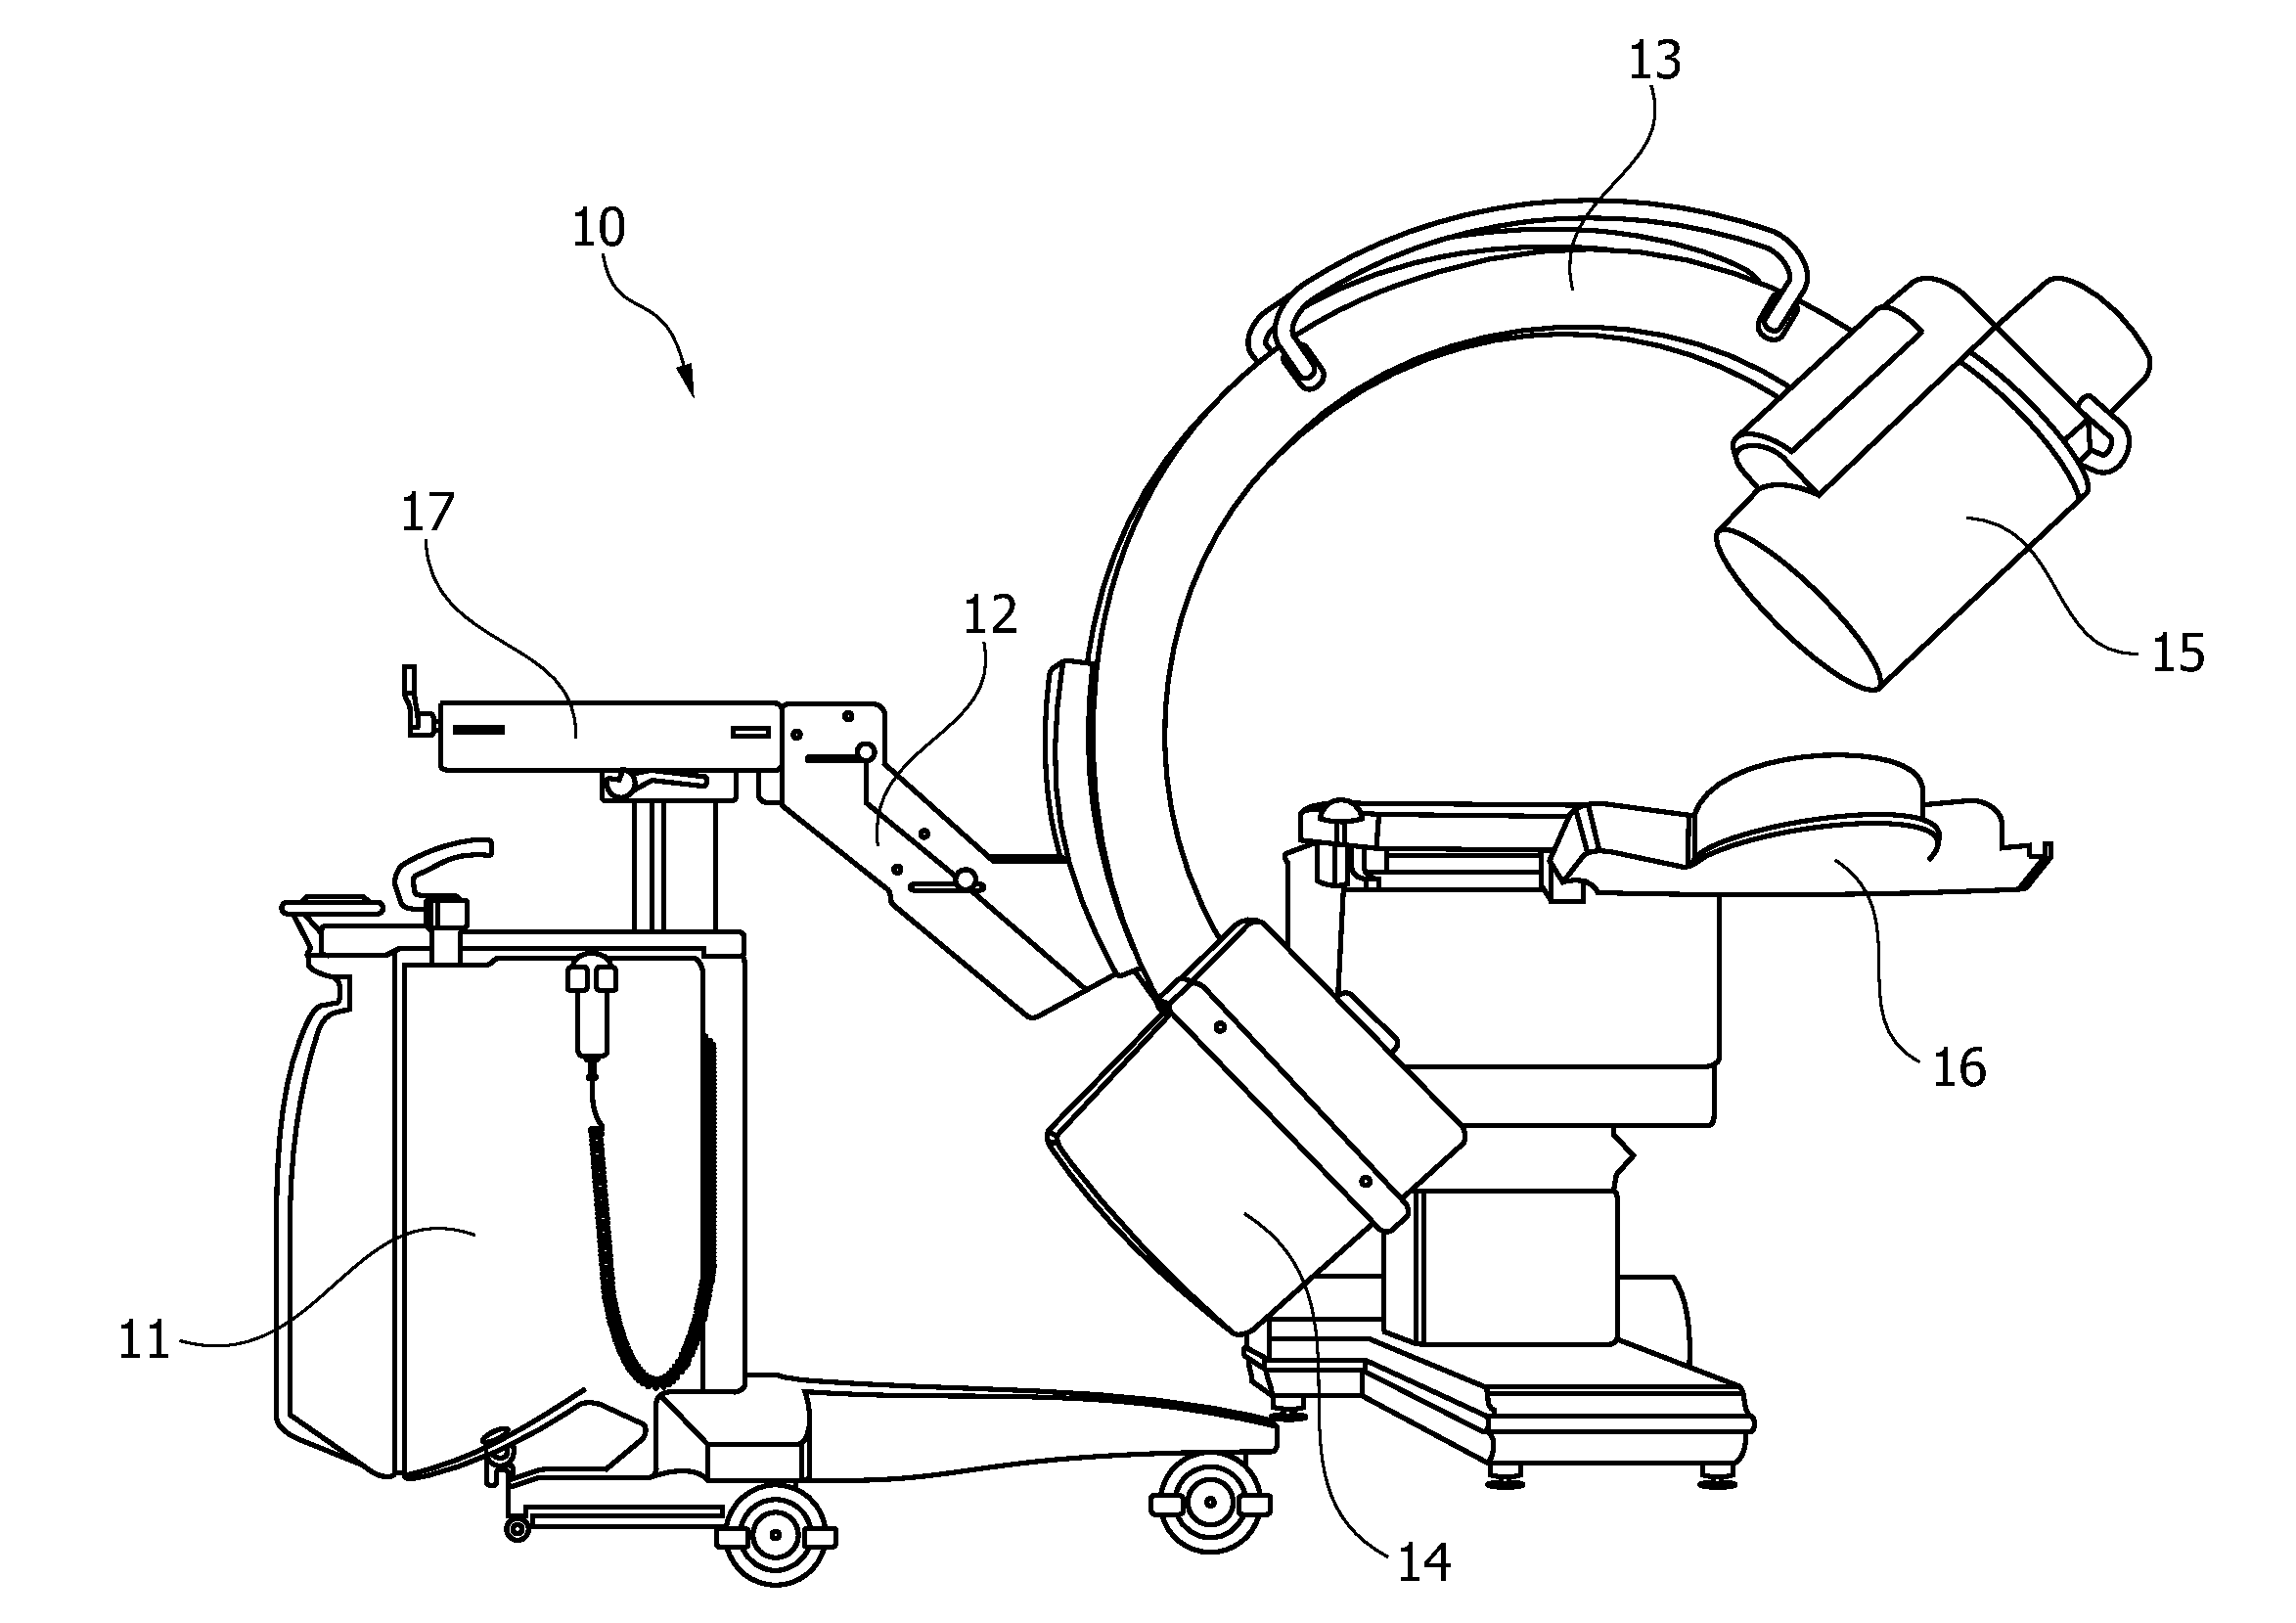 Guidance chain for guiding cables or other lines in a medical diagnostic apparatus